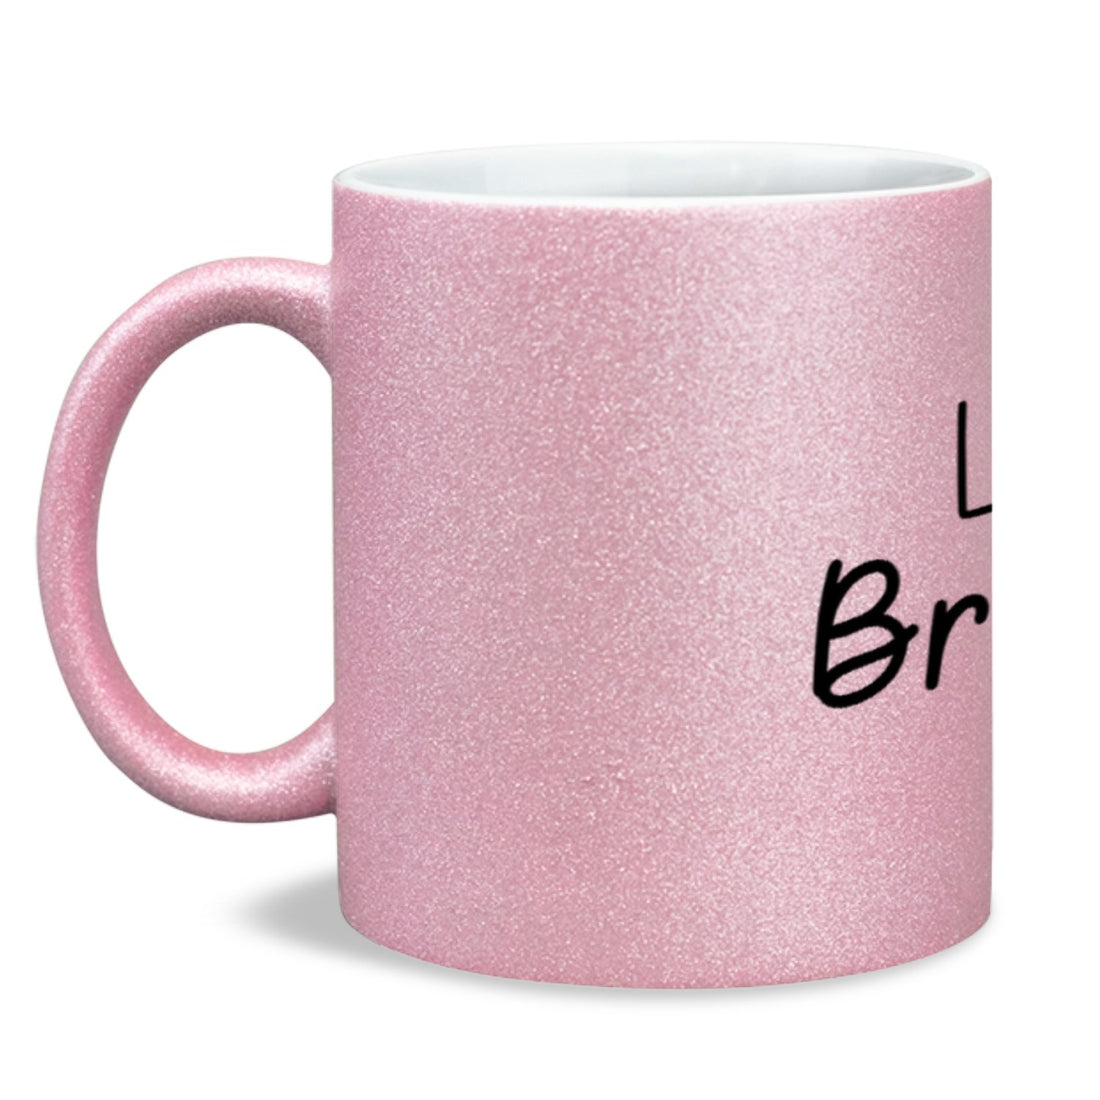 Life is Brew-tiful - Positively Sassy - Life is Brew-tiful